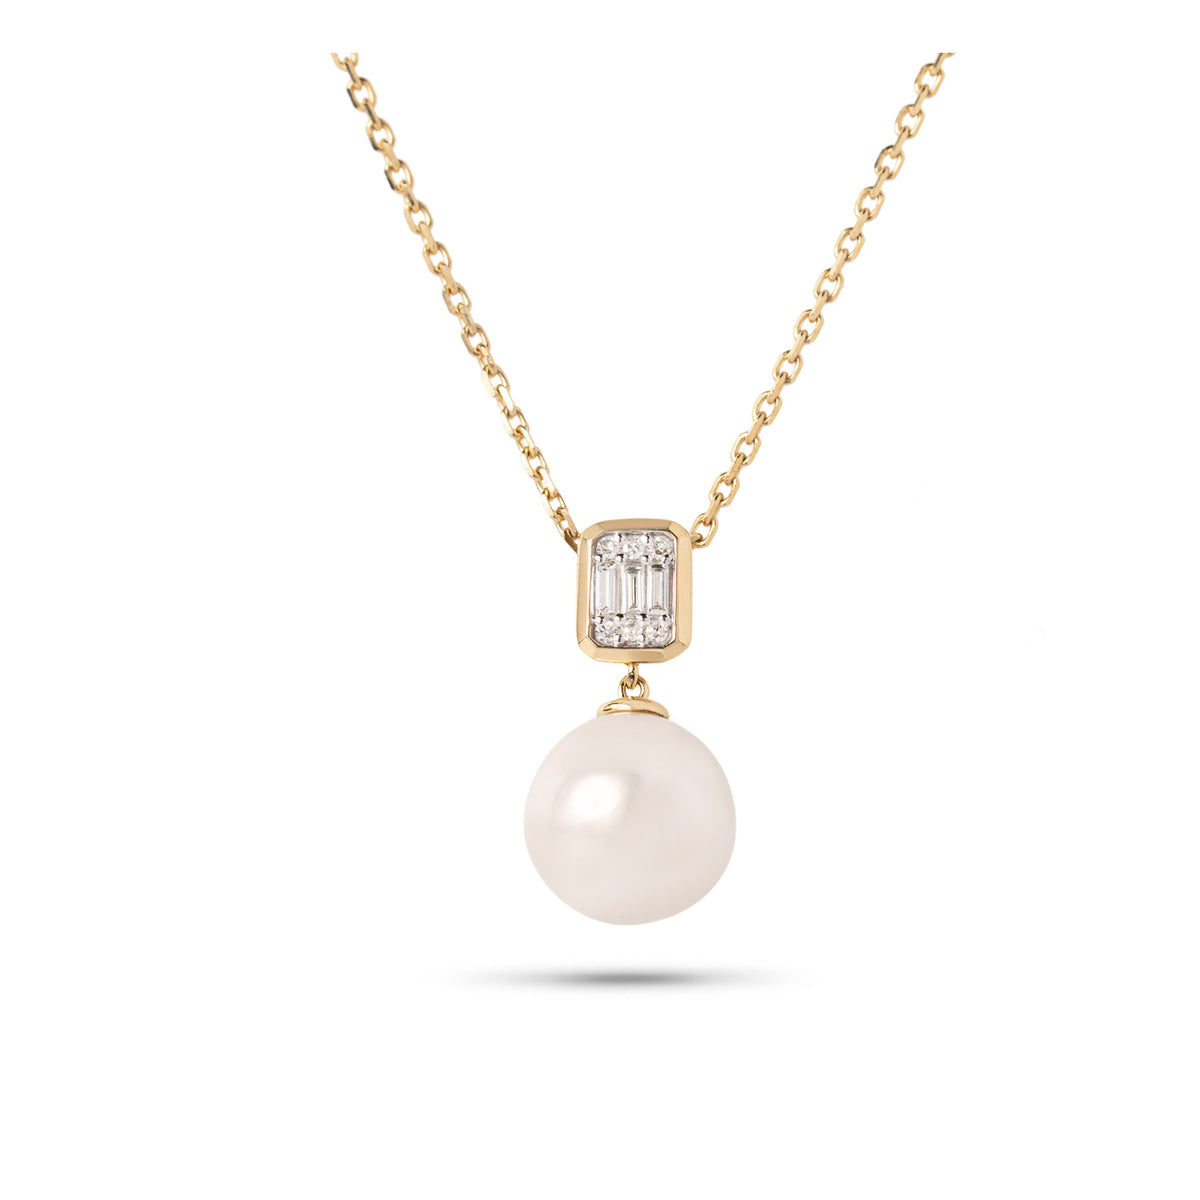 14k yellow gold pearl and diamond pendant necklace